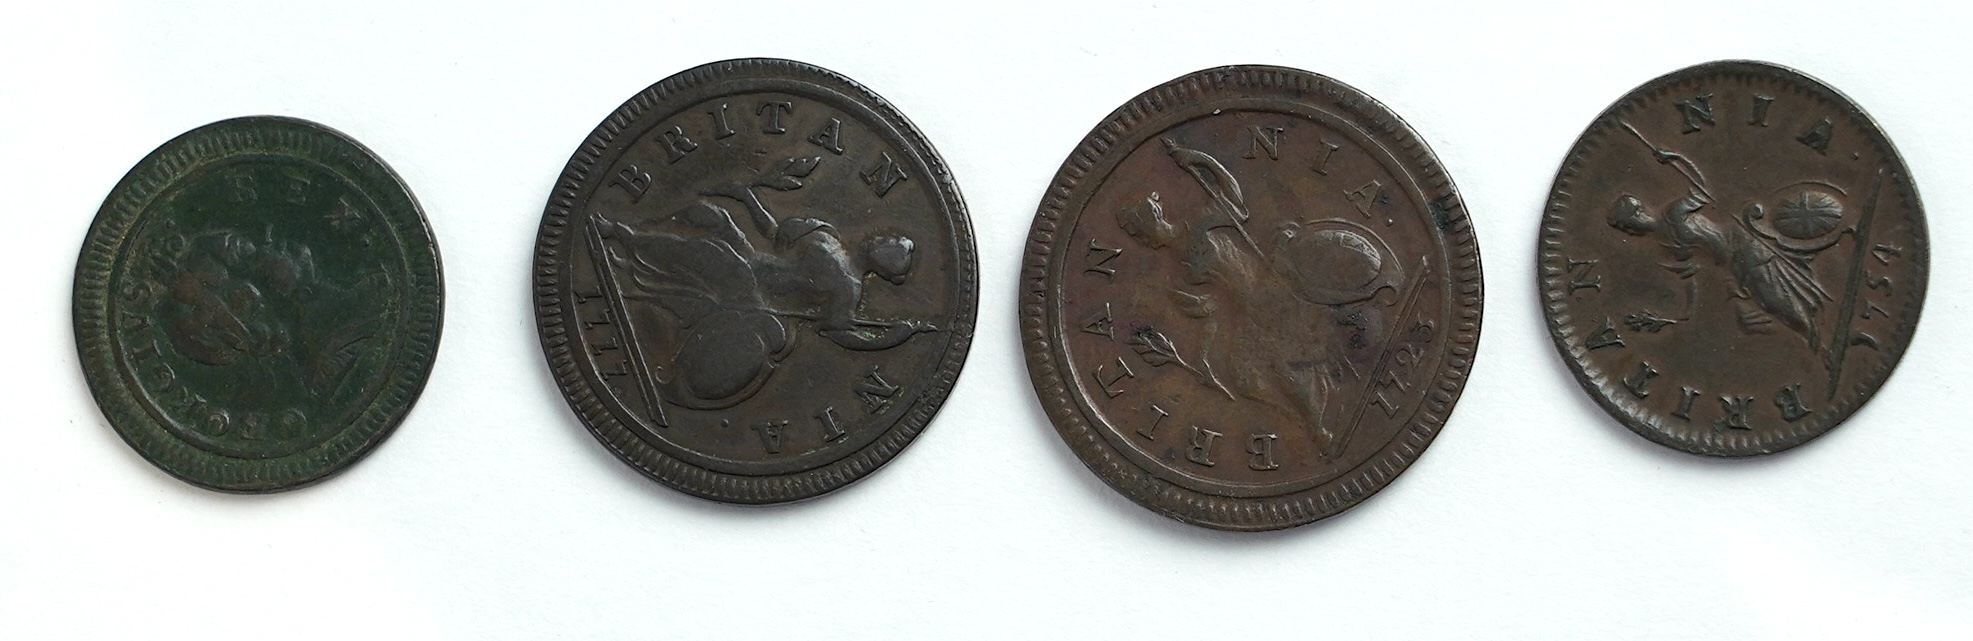 British farthings and halfpennies, Georgian period; two George I halfpenny coins, 1717, graffiti initials each side of portrait bust otherwise fine and 1723, about fine, three George I farthings, including 1719, fine, tw